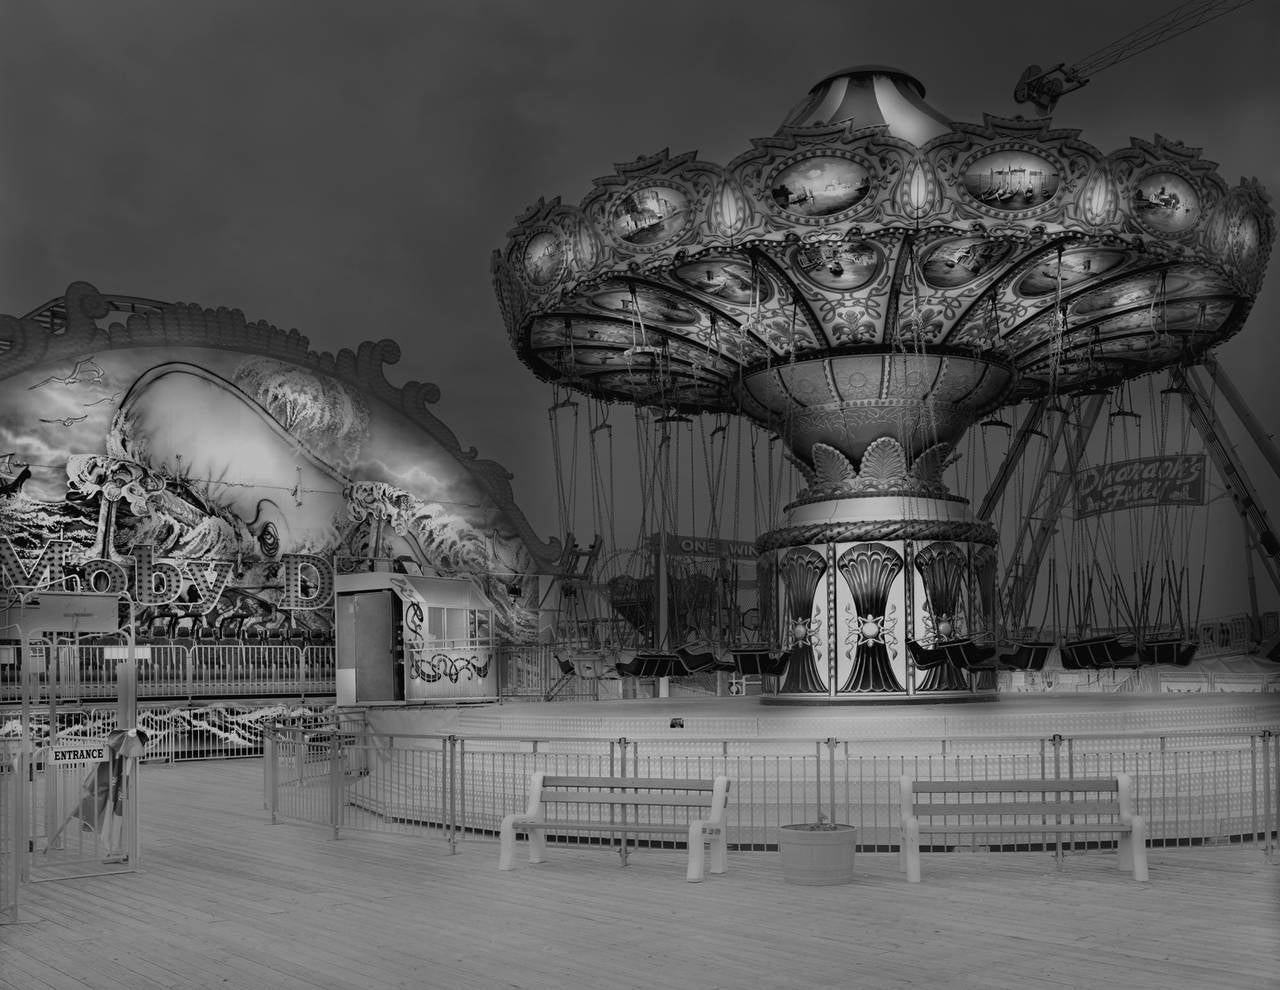 Michael Massaia Black and White Photograph - Moby Dick & Swing Ride, Seaside Heights